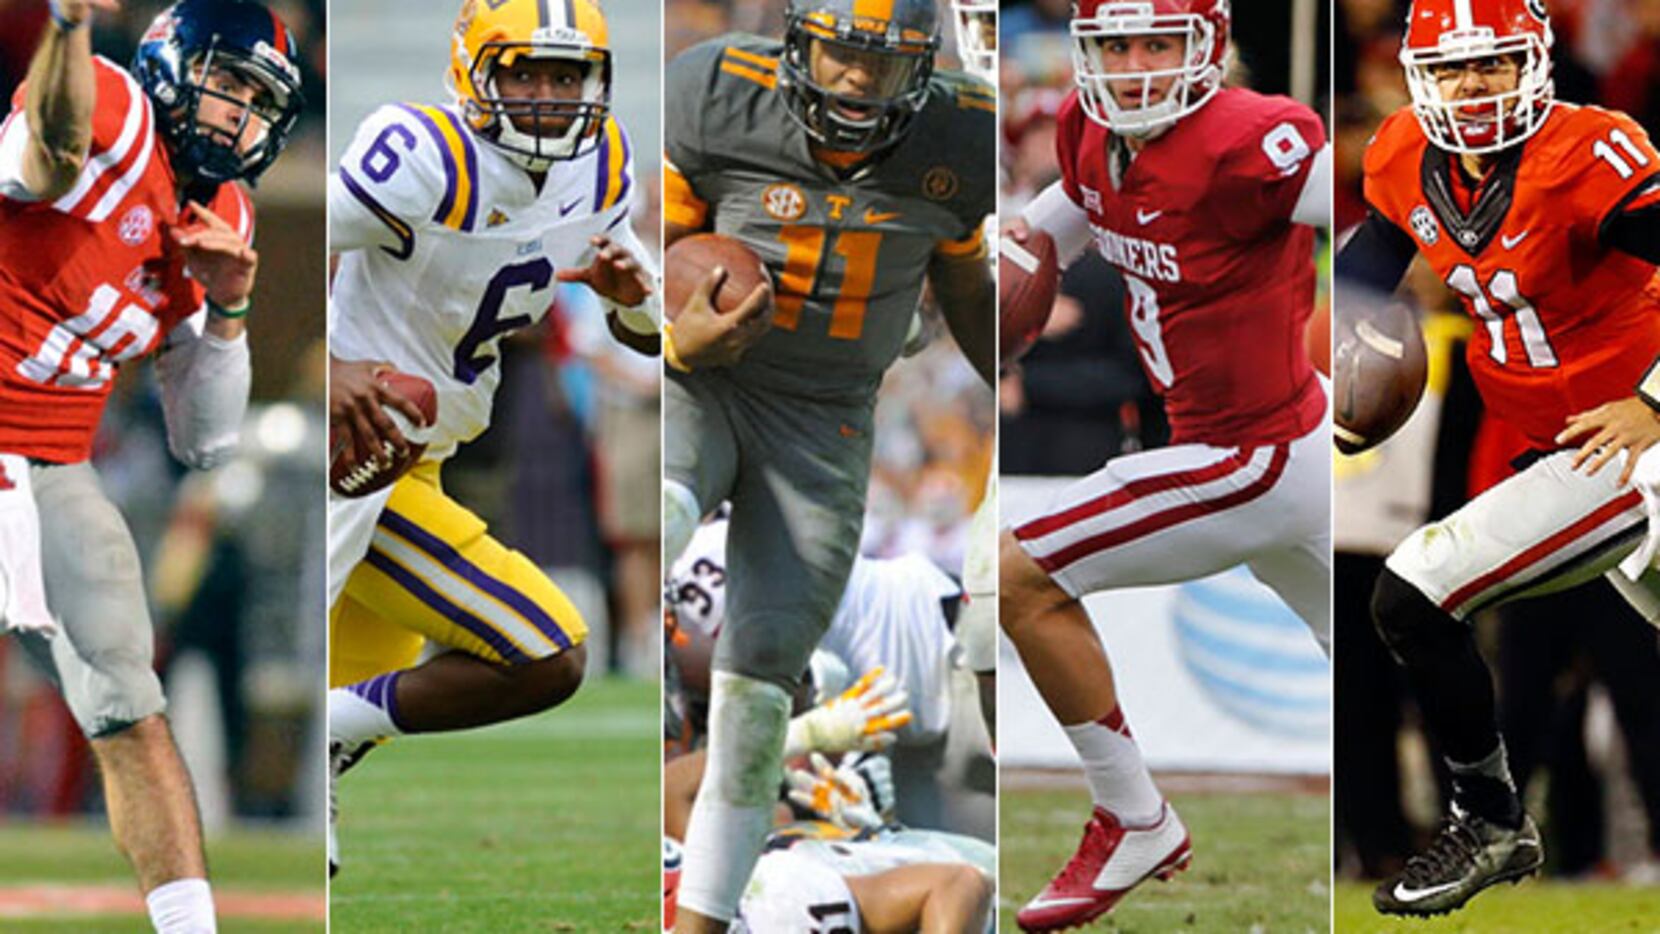 Pictured from left to right: Chad Kelly of Ole Miss, Brandon Harris of LSU, Joshua Dobbs of...